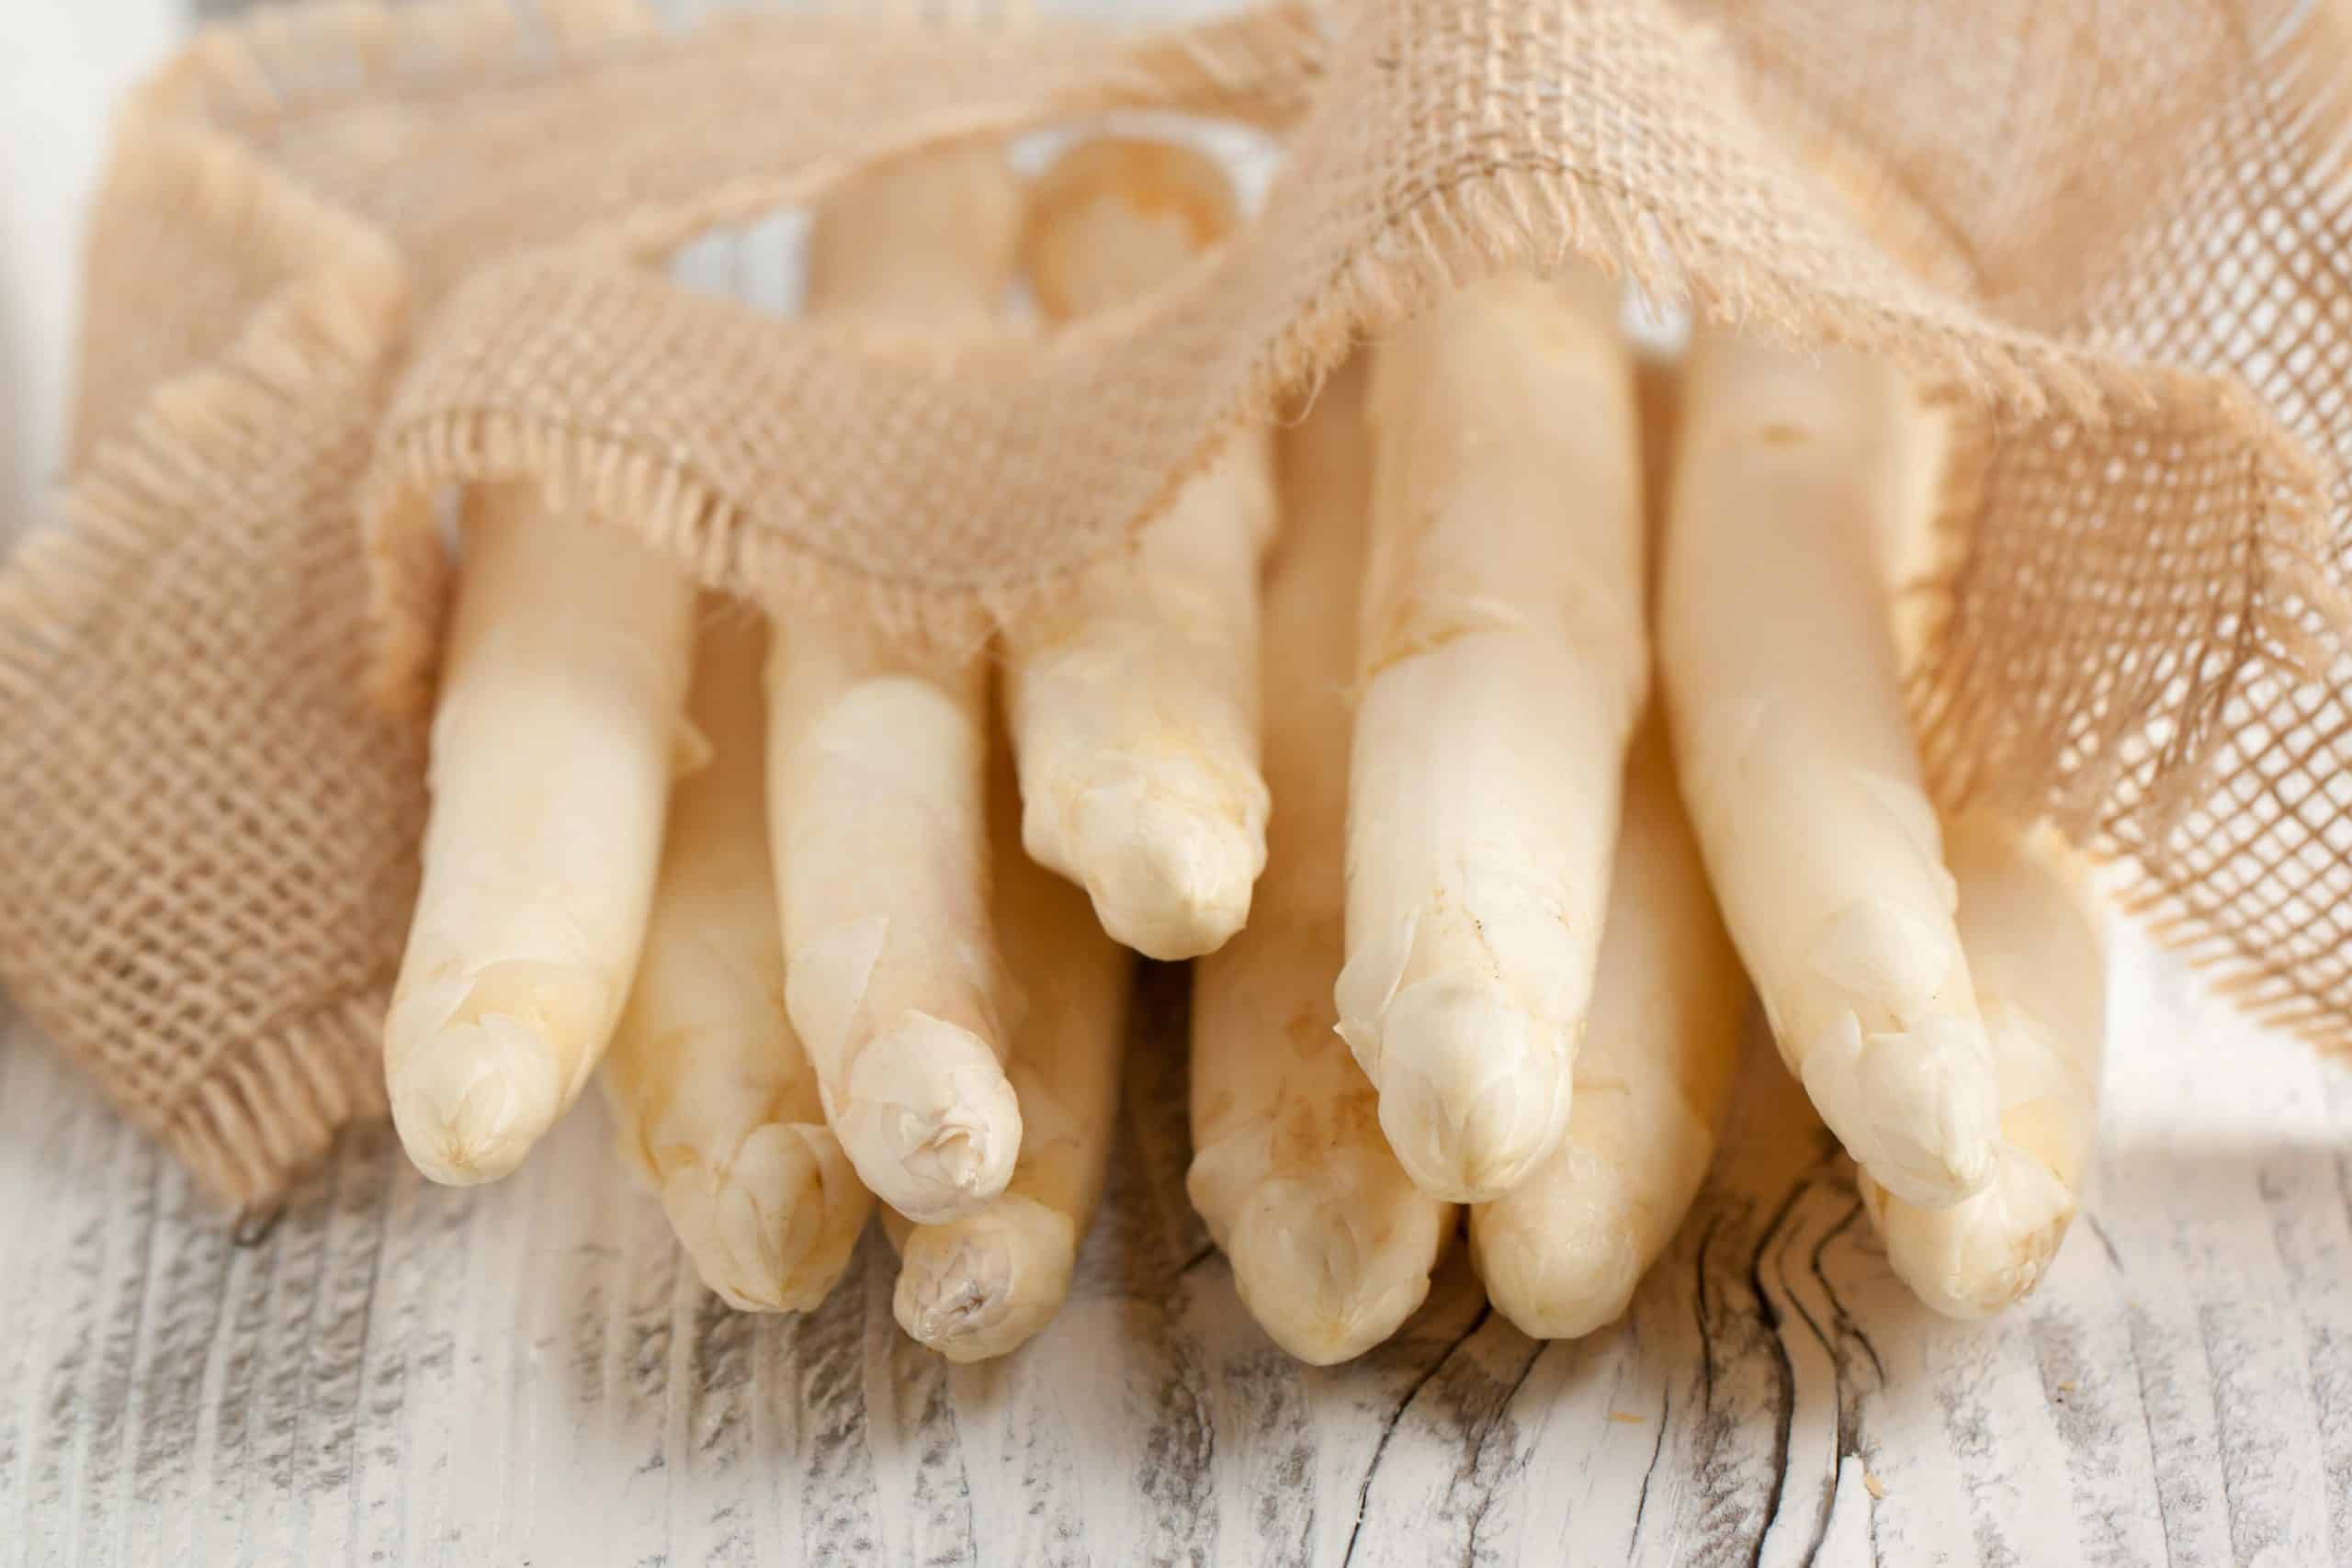 Bunch of fresh white asparagus on old wooden table